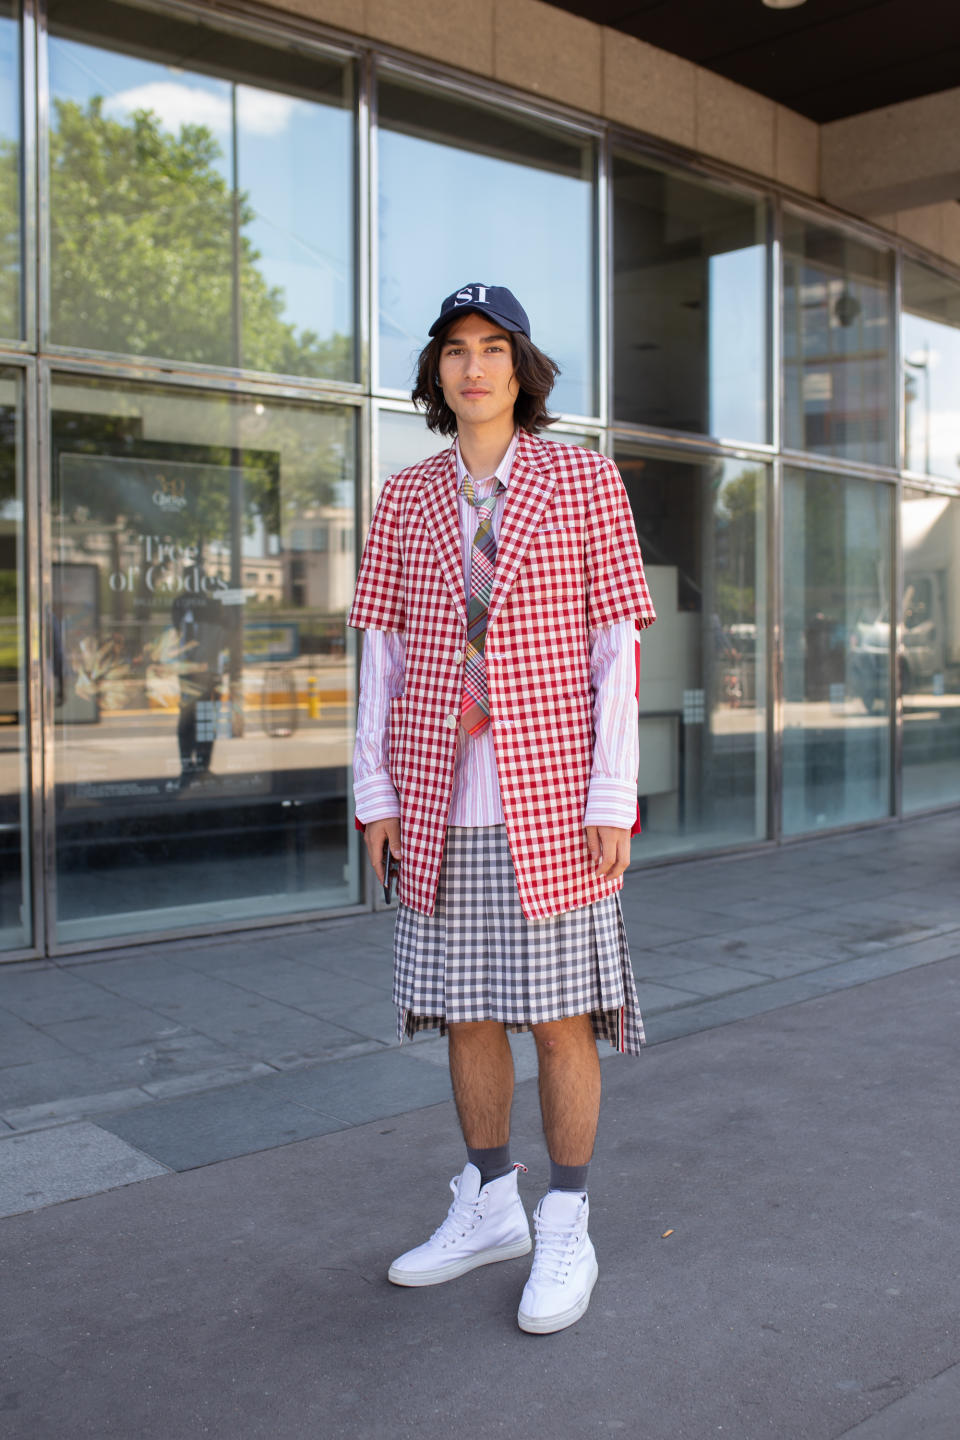 PARIS, FRANCE - JUNE 22: Blake Abbie is seen on the street during men's Paris Fashion Week wearing red checker blazer with green checker skirt and neck tie with navy cap and white sneakers on June 22, 2019 in Paris, France. (Photo by Matthew Sperzel/Getty Images)